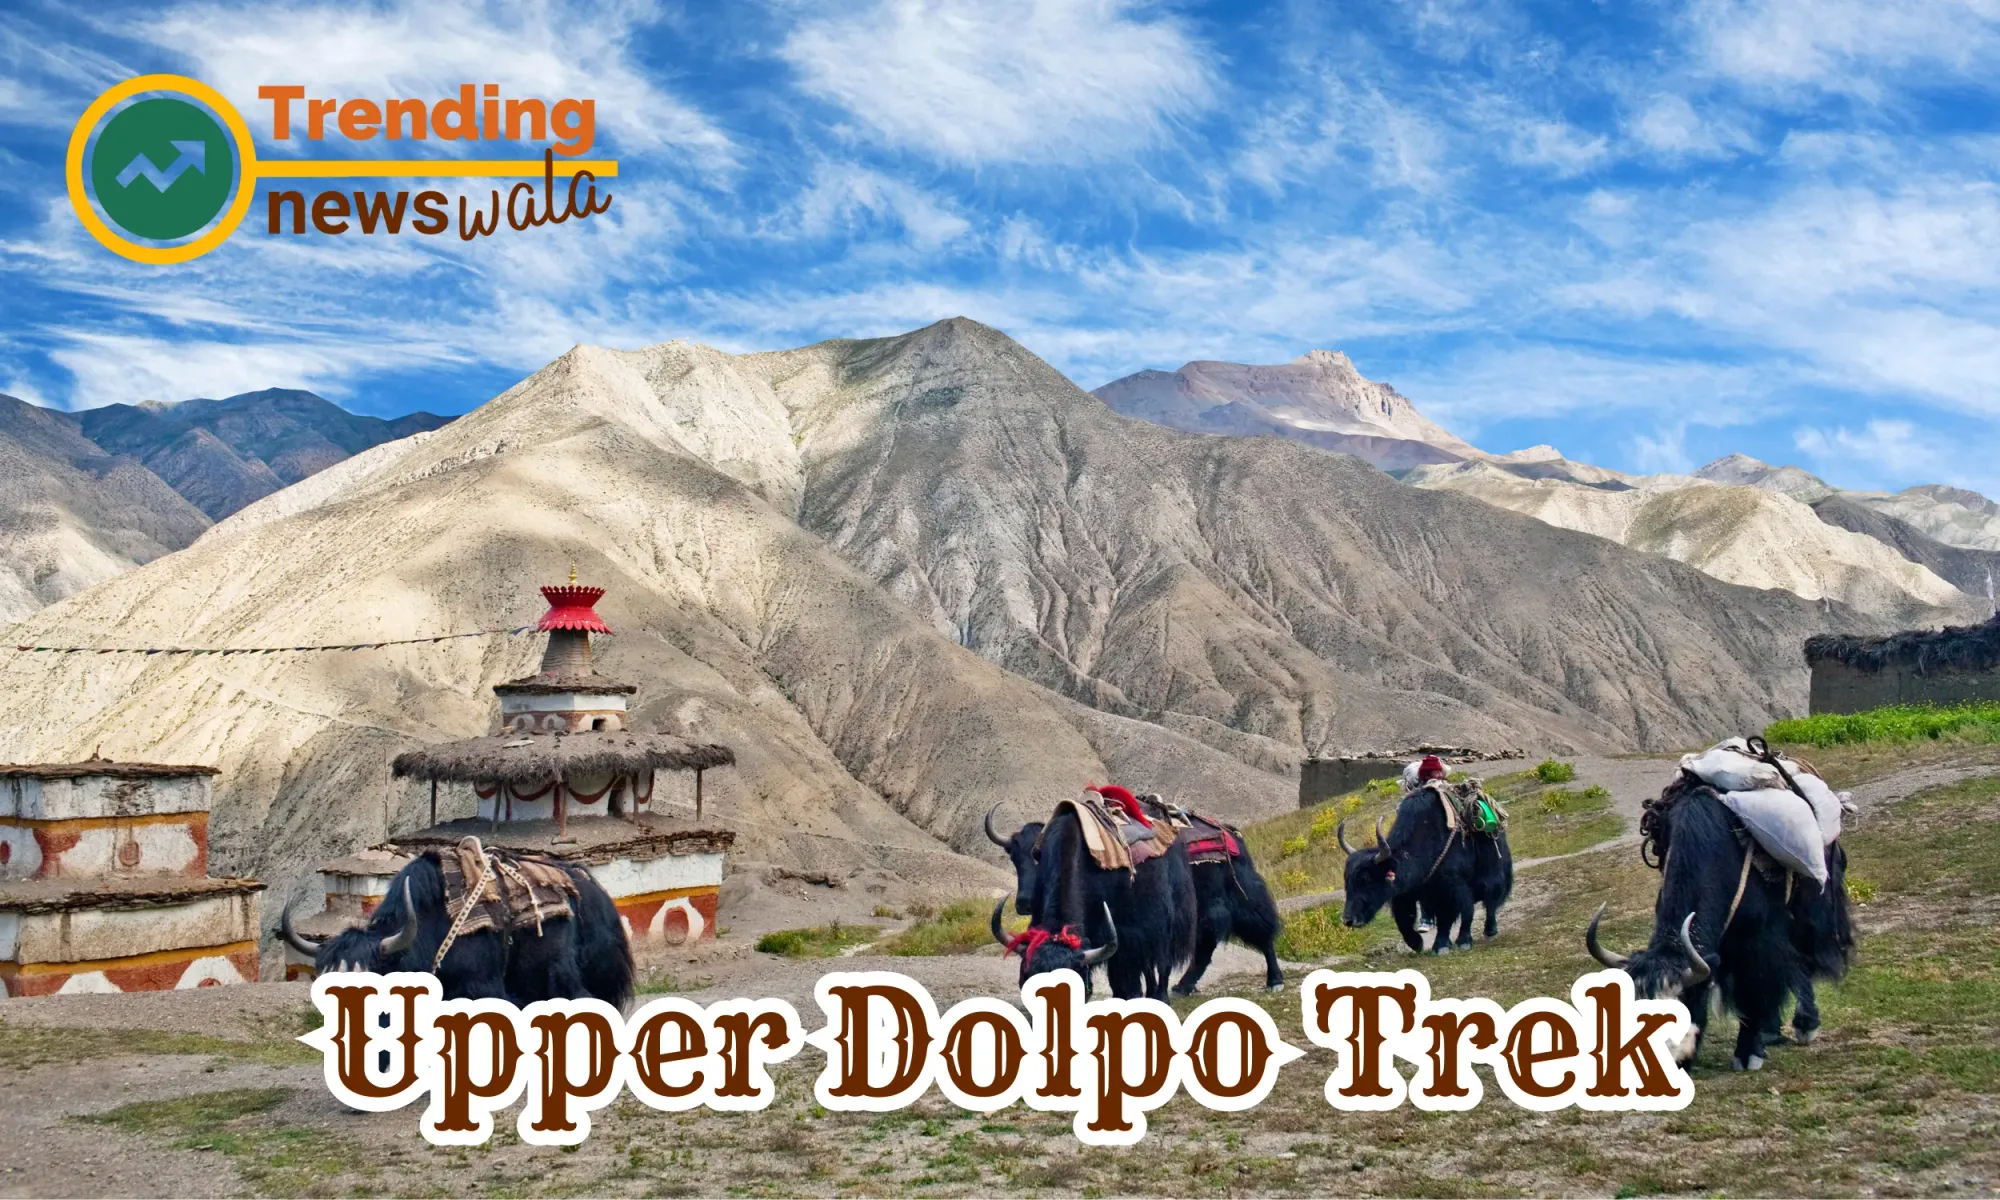 The Upper Dolpo Trek is a remote and challenging trekking route located in the Dolpo region of Nepal